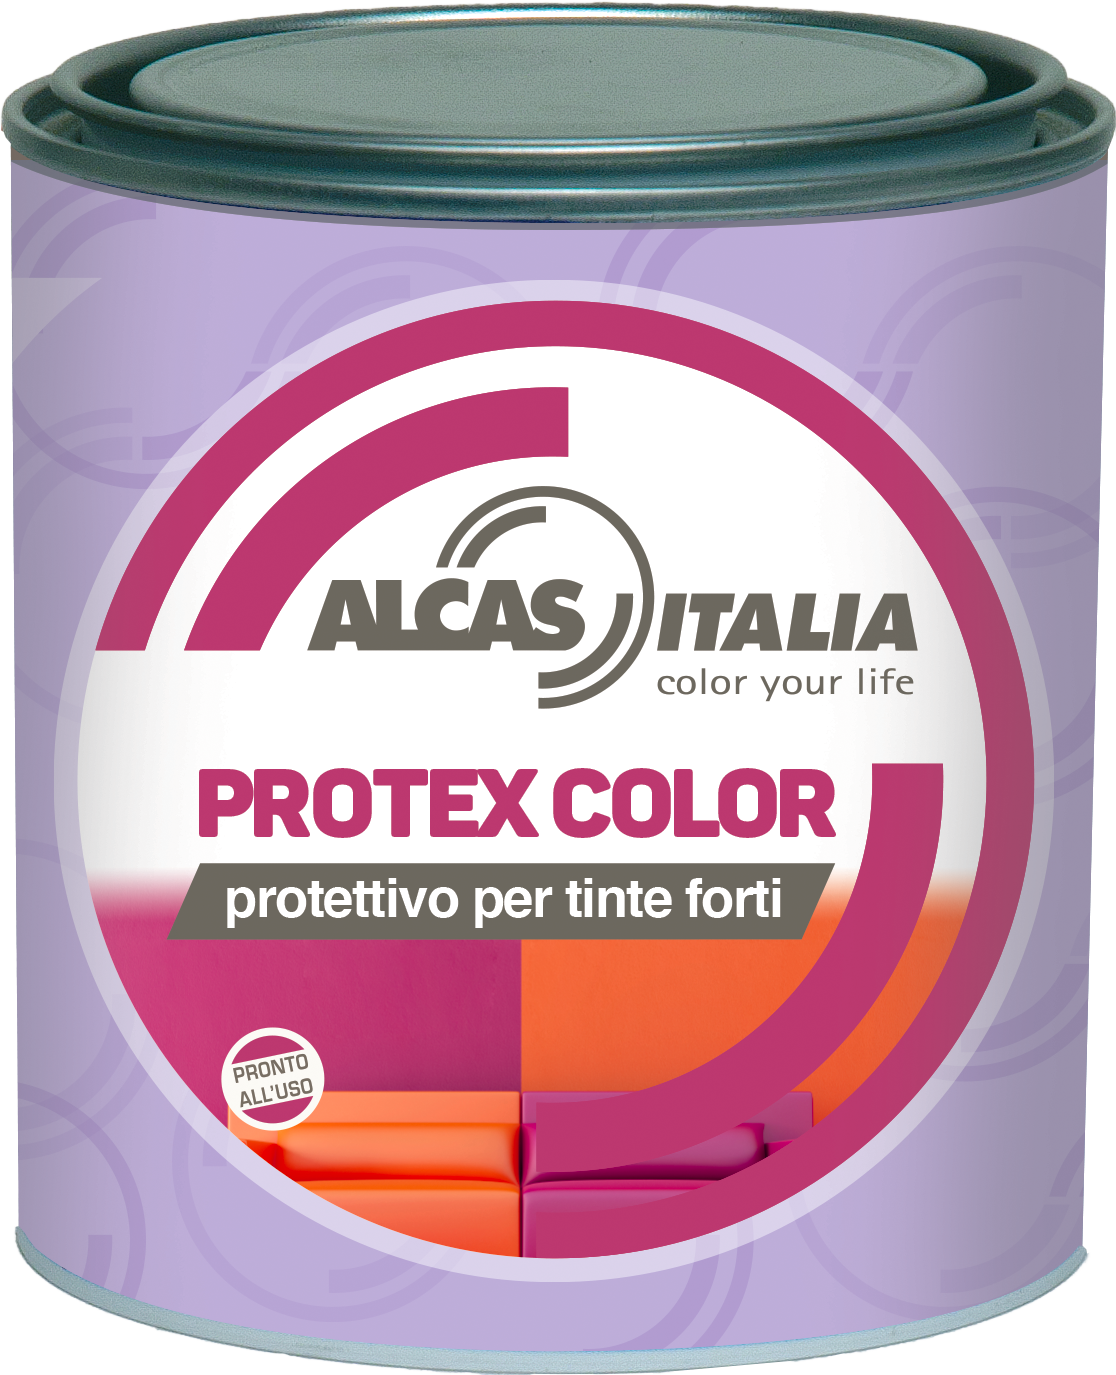 Protexcolor